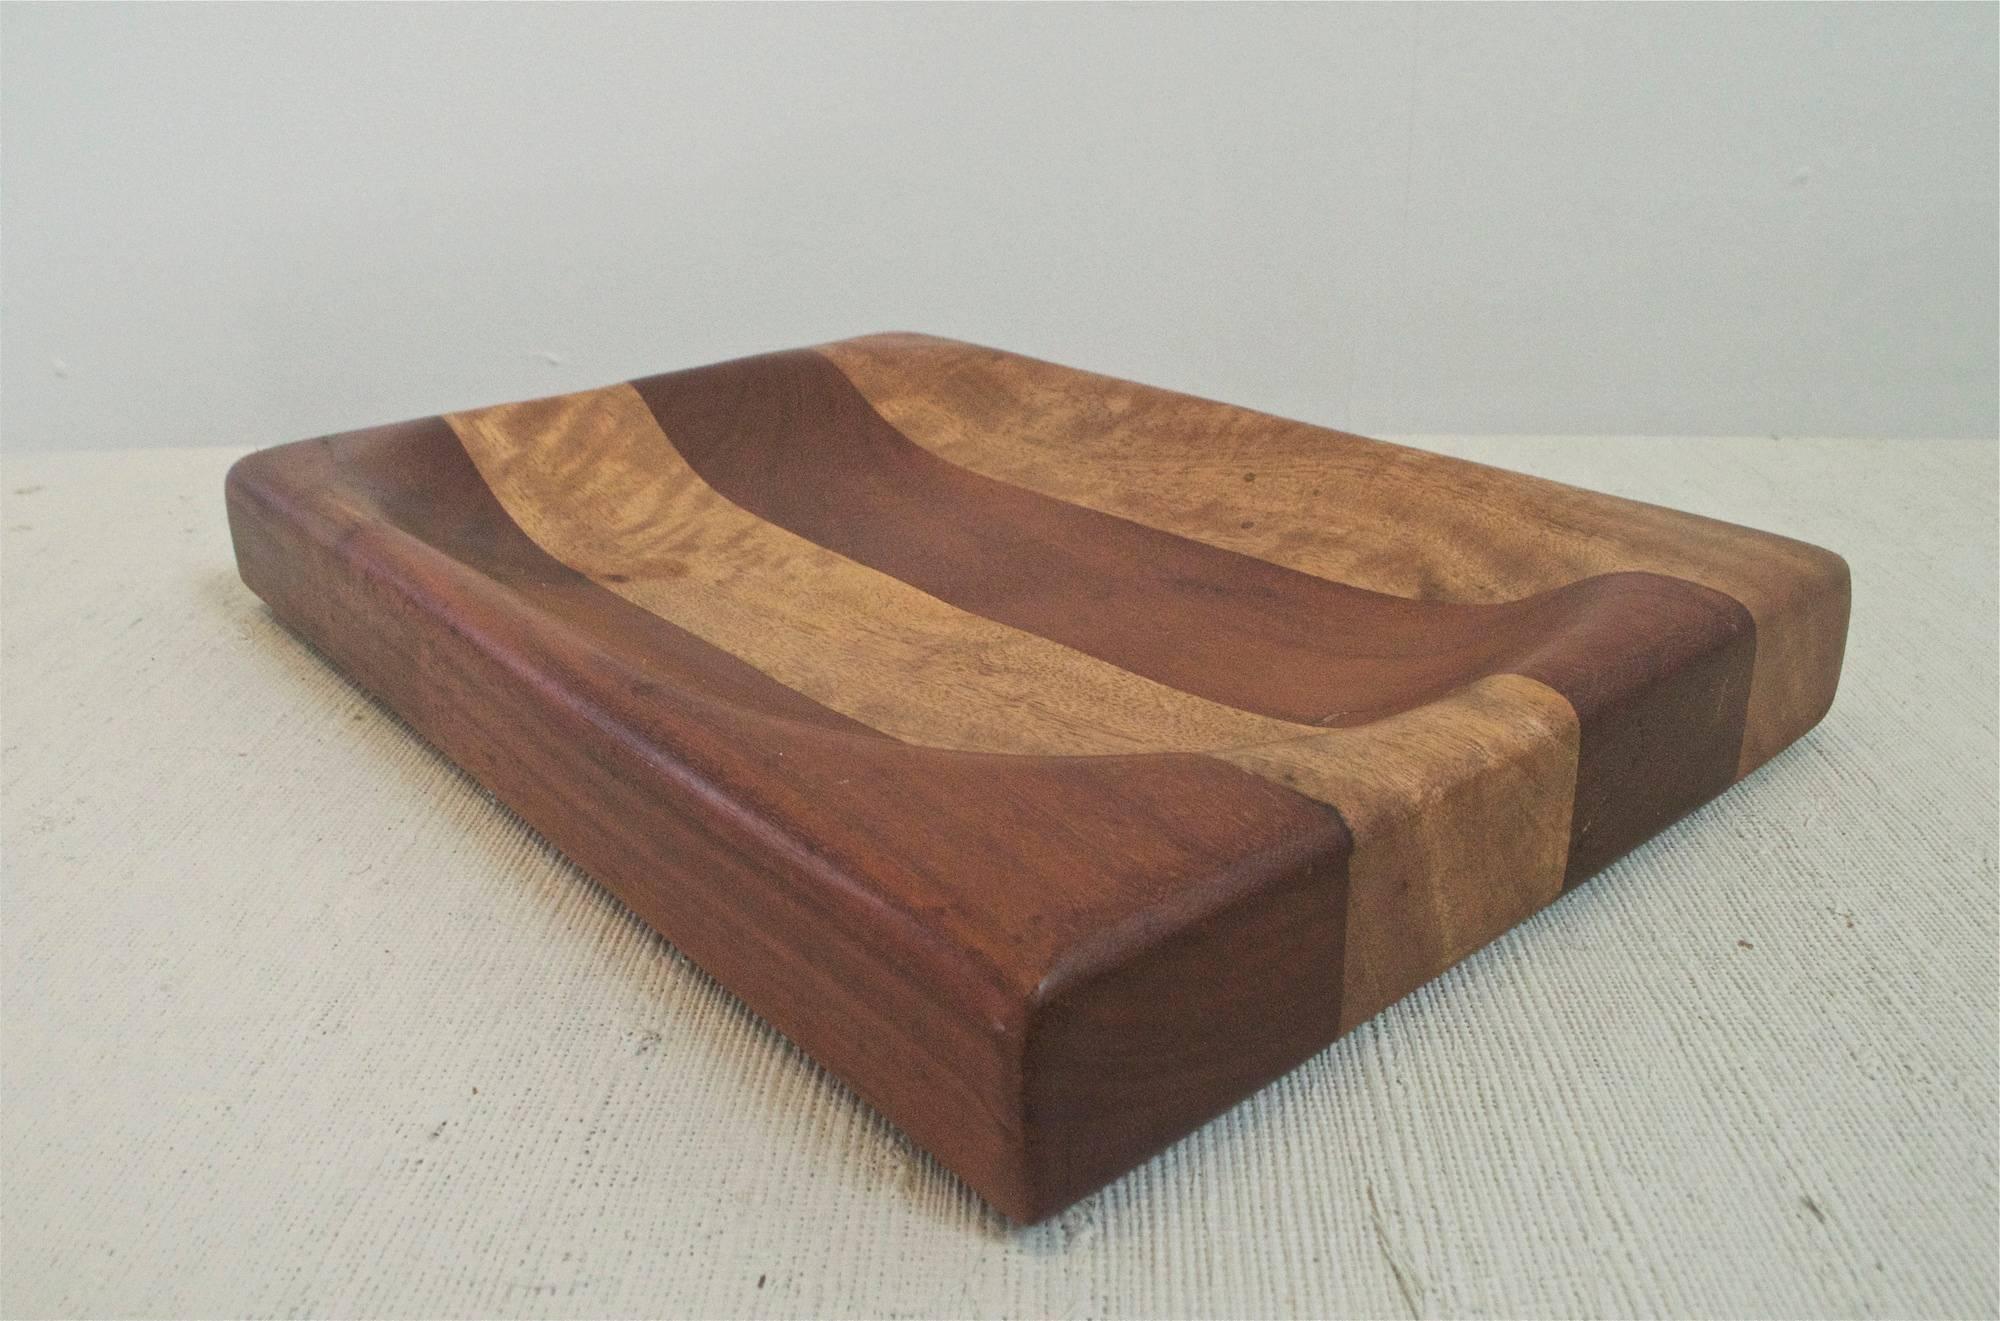 Turned Vintage Wooden Catchall For Sale